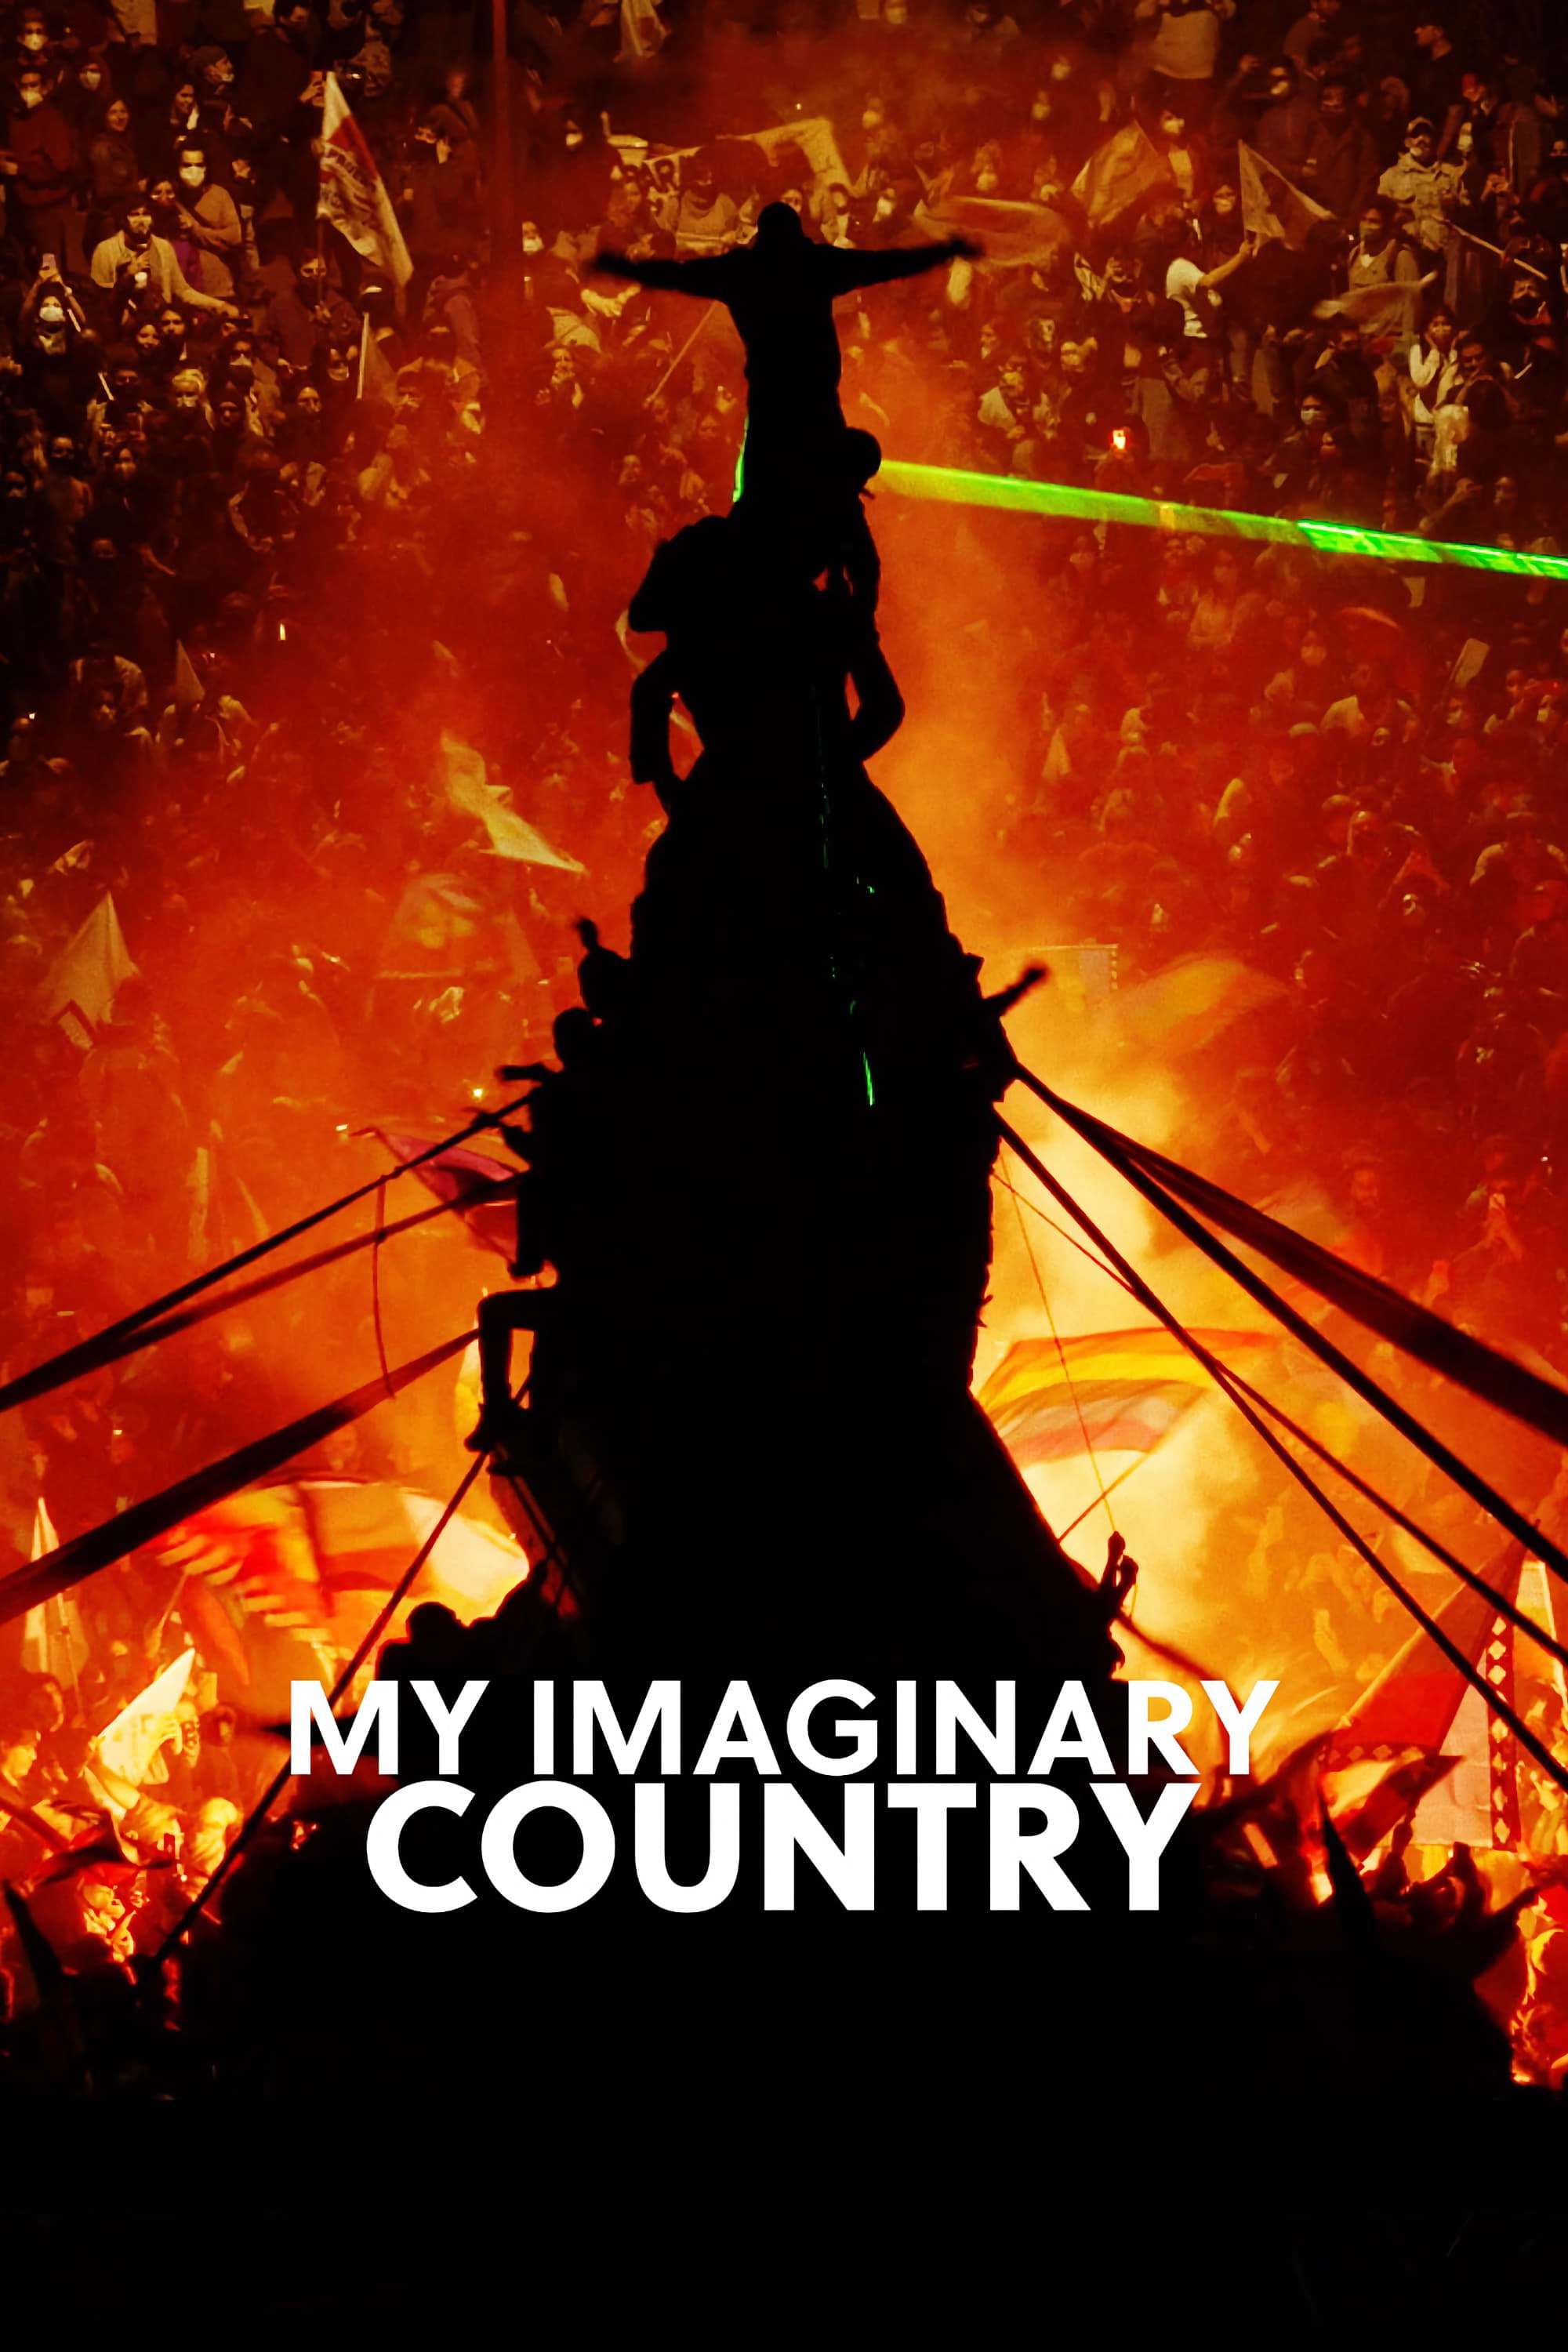 My Imaginary Country Intense Scenes